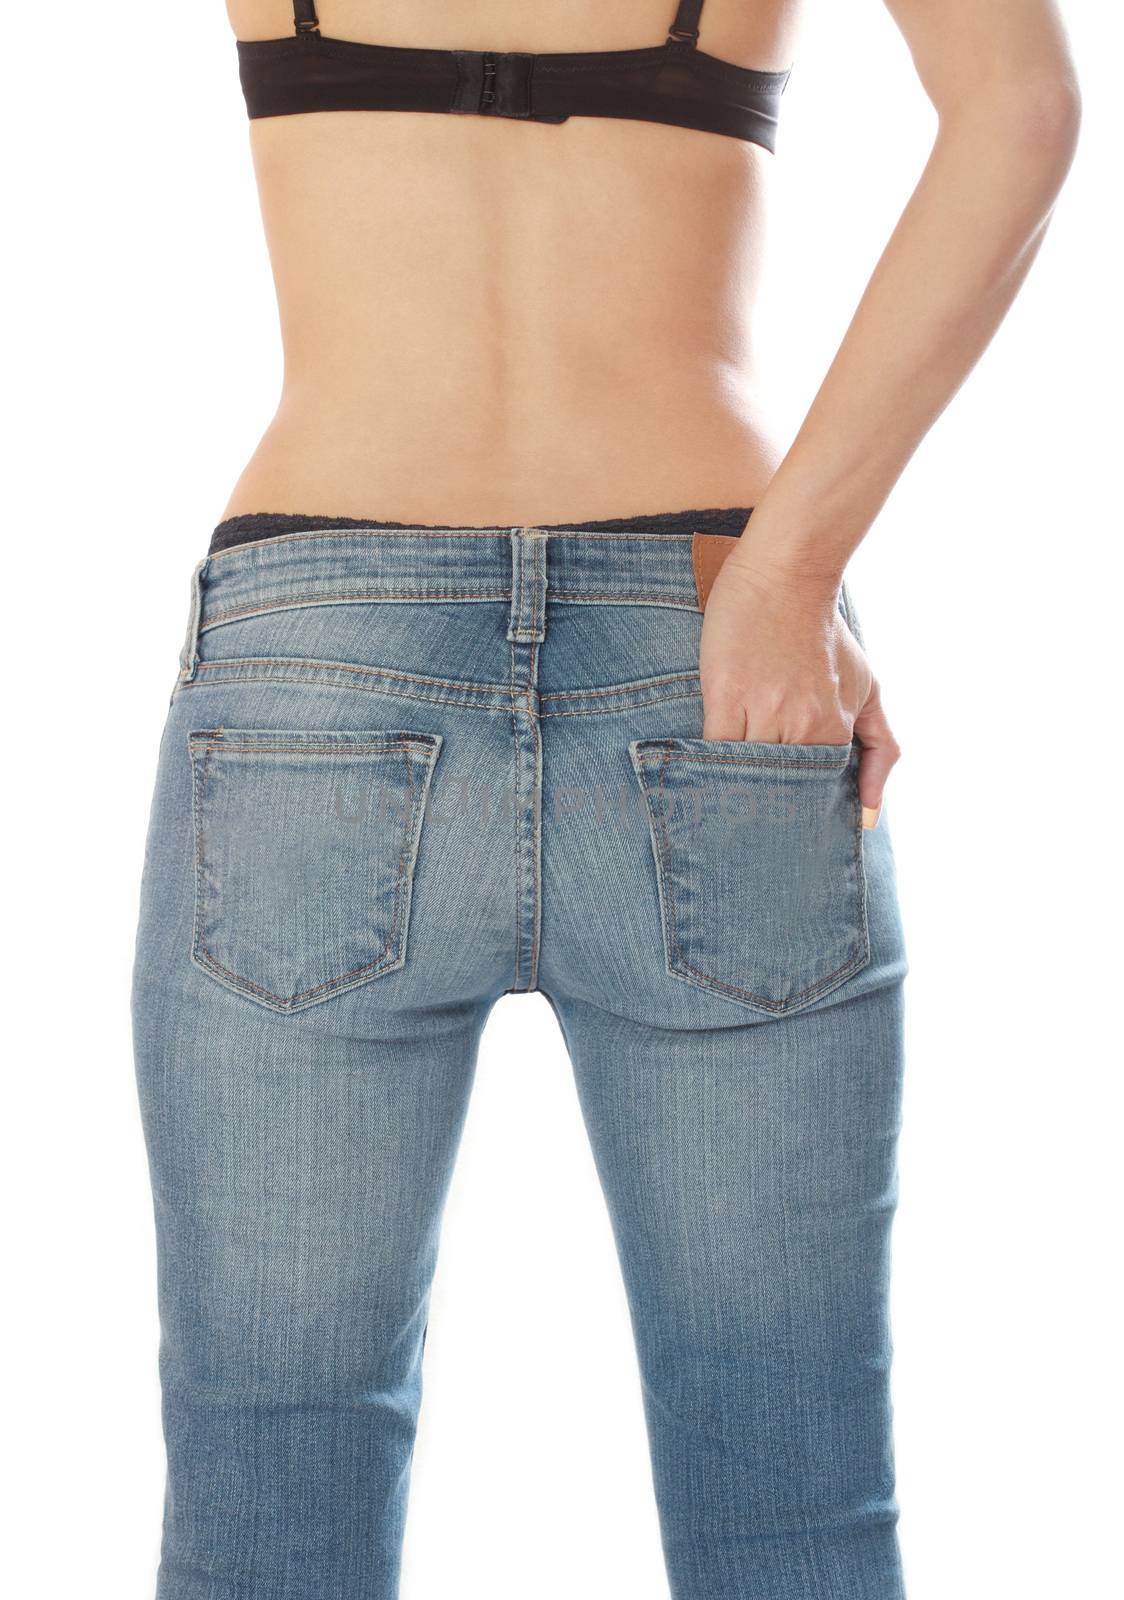 Female wearing jeans and isolated on white background.